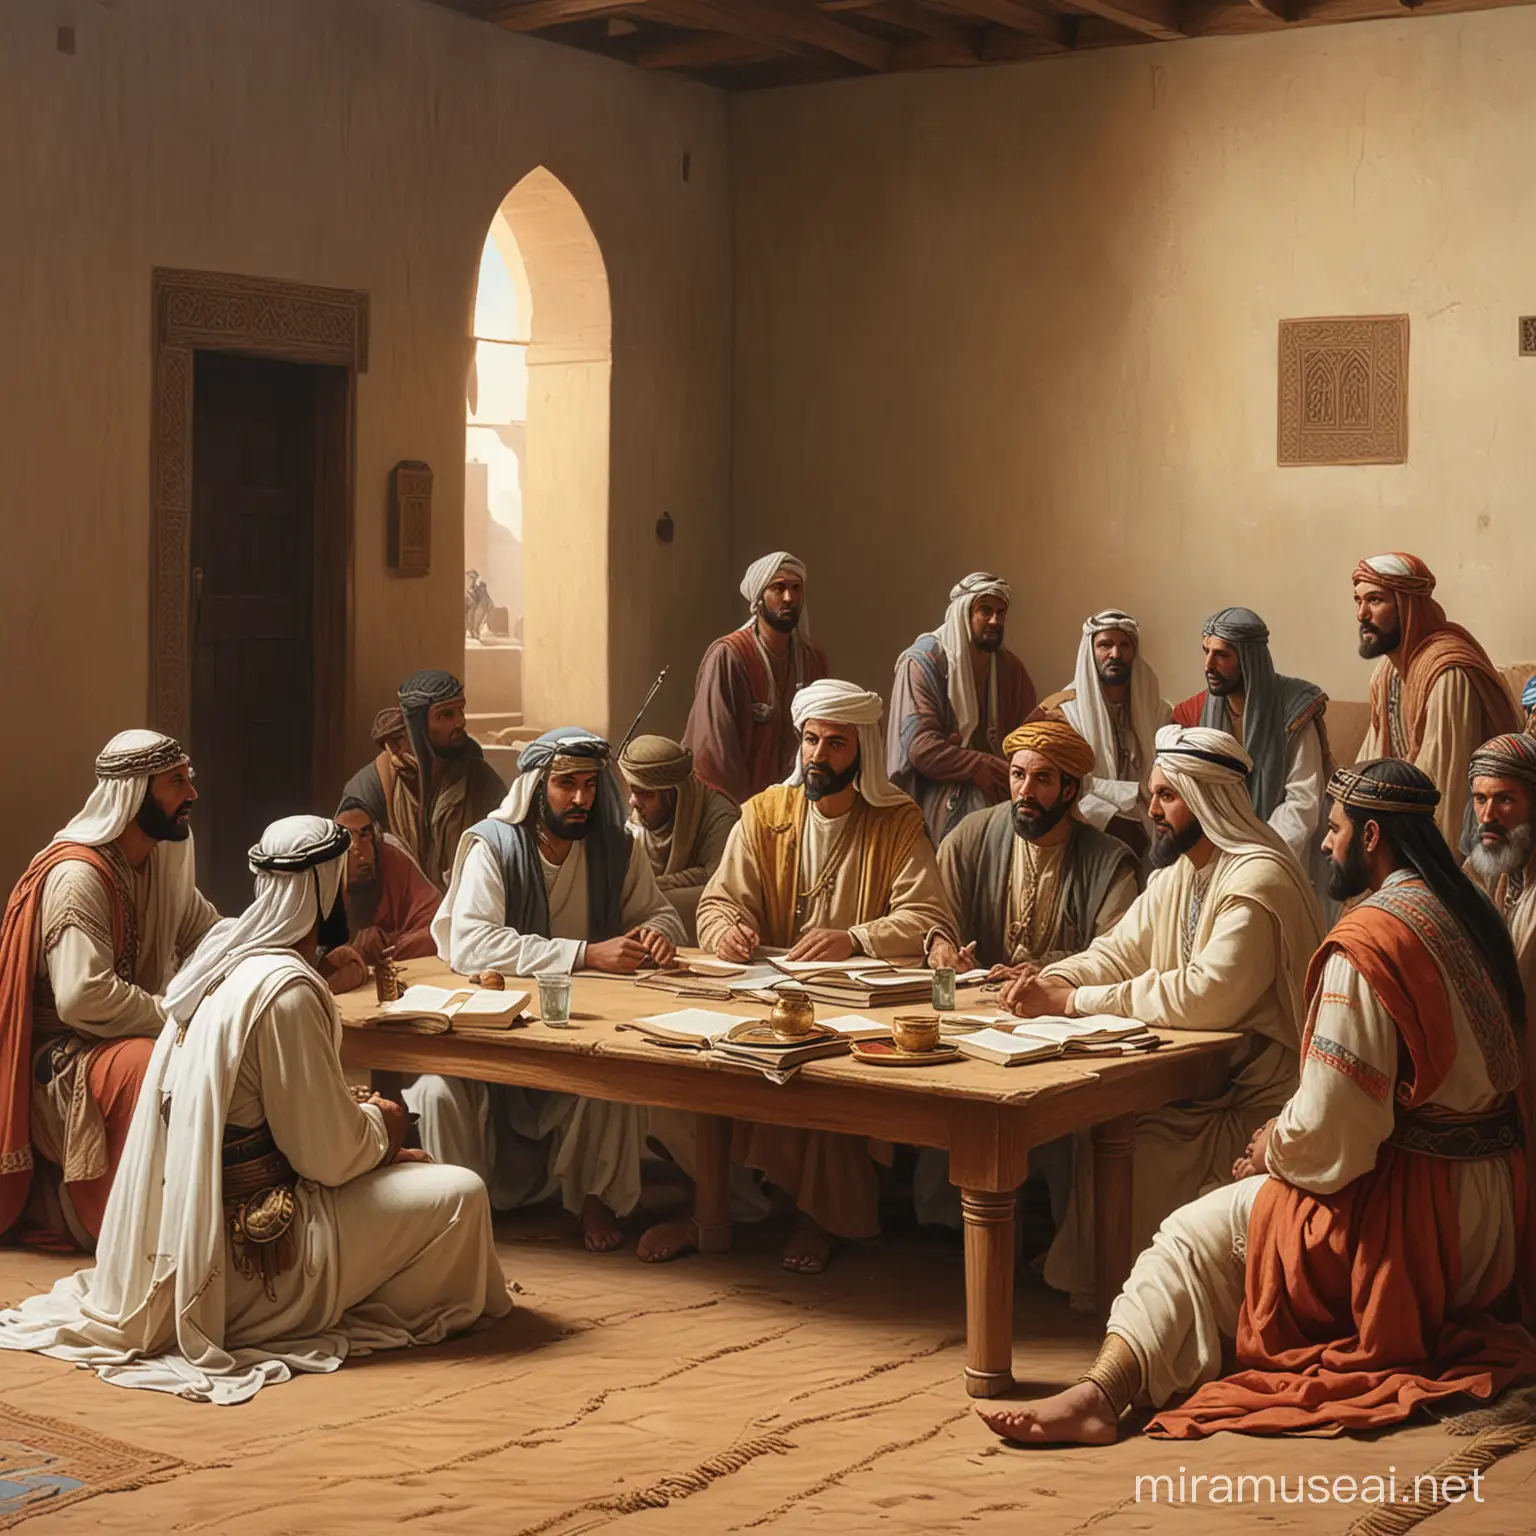 Arabian Court Meeting in 600AD Judging Chamber